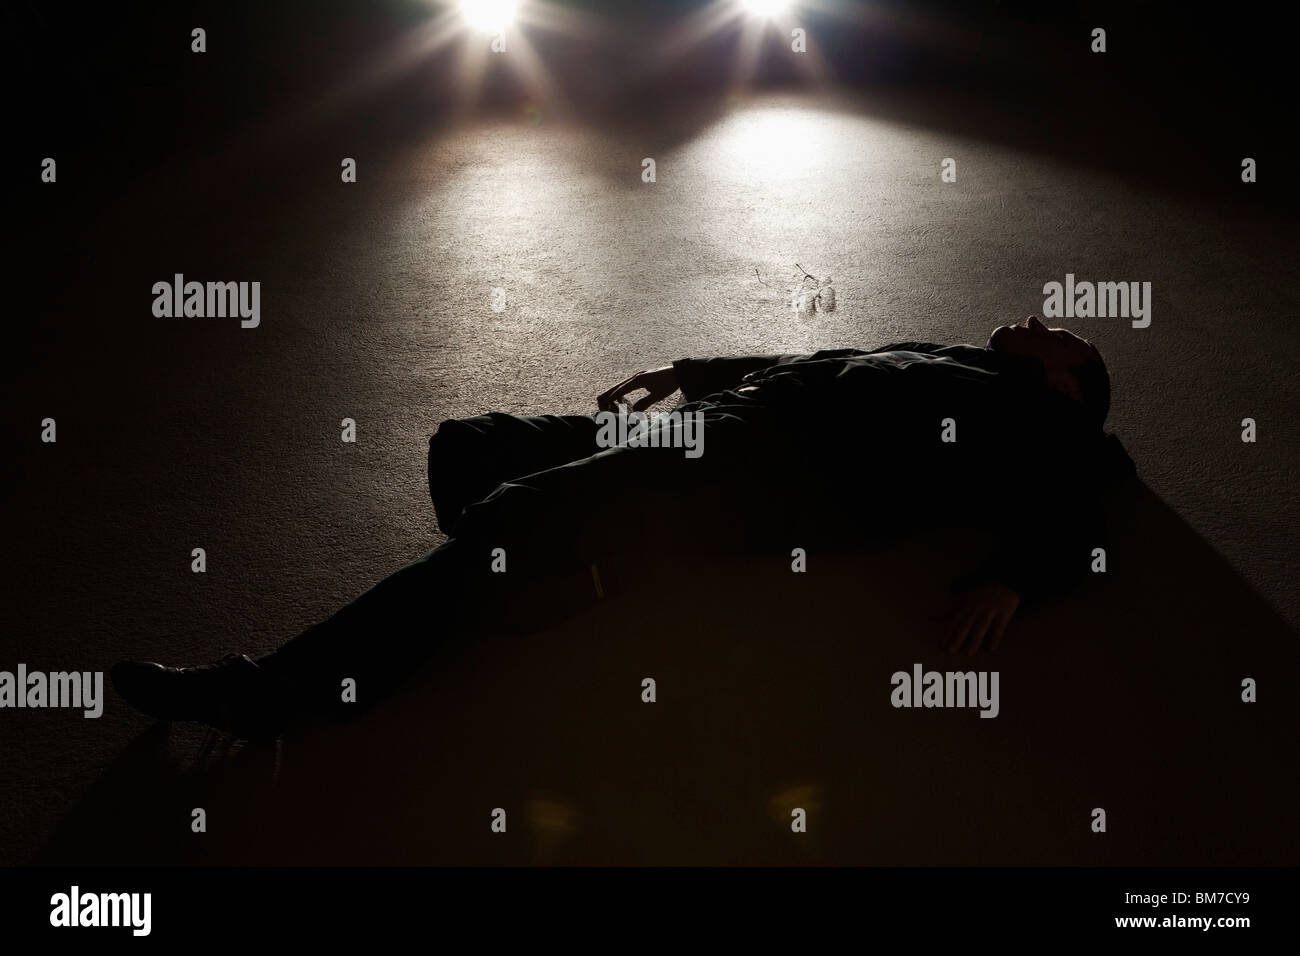 A man lying on the ground in front of a car at night Stock Photo